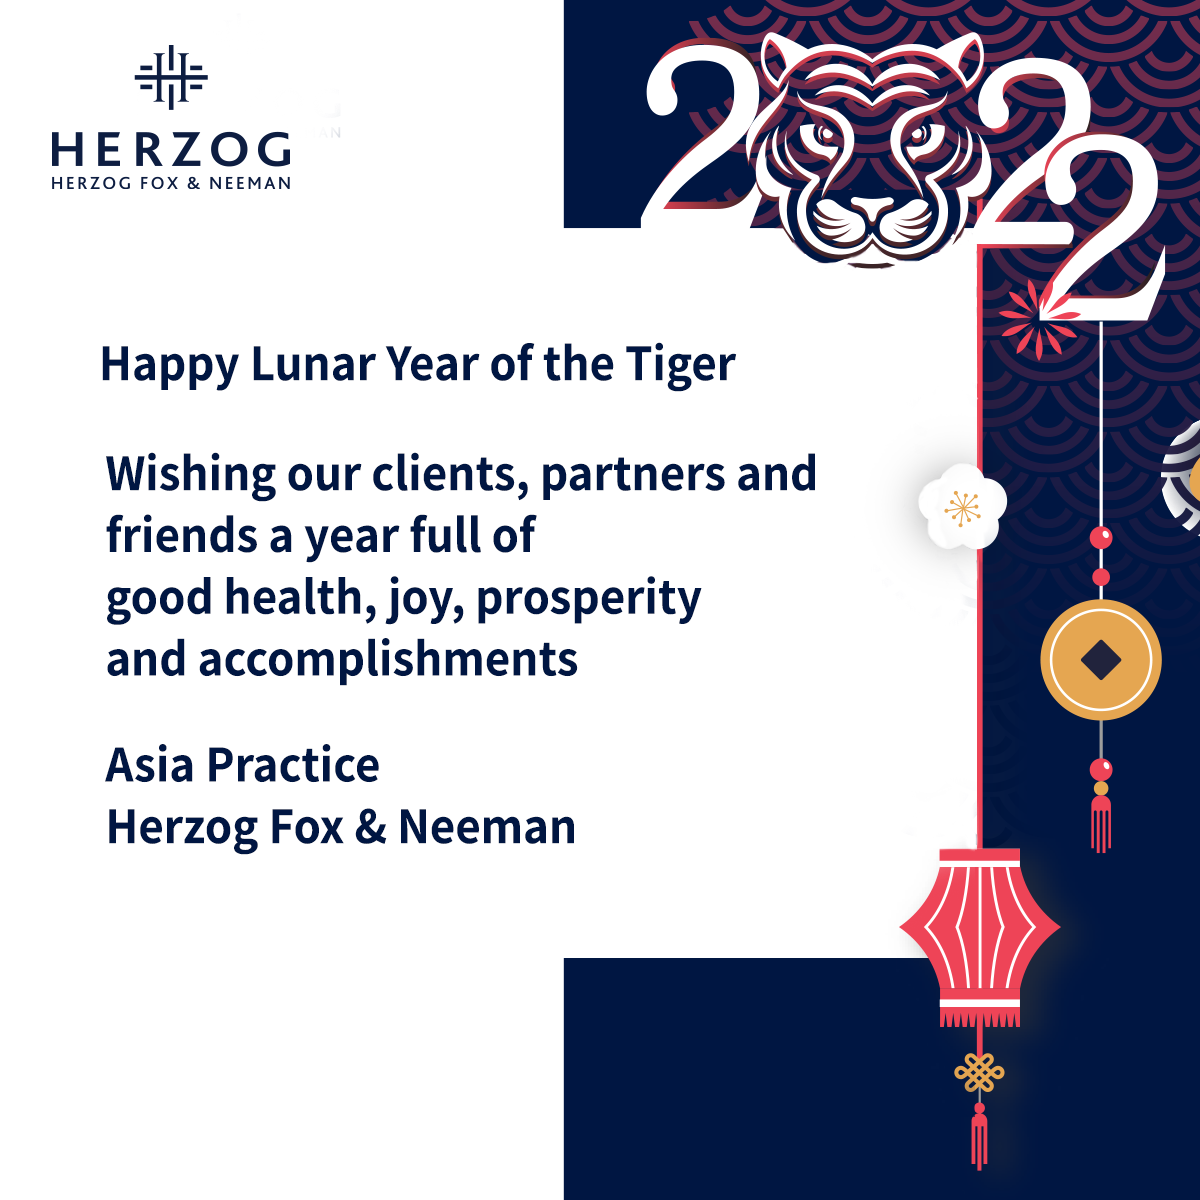 Happy Lunar Year of the Tiger  Wishing our clients, partners and friends,  a year full of good health, joy, prosperity and accomplishments  Herzog's Asia Practice